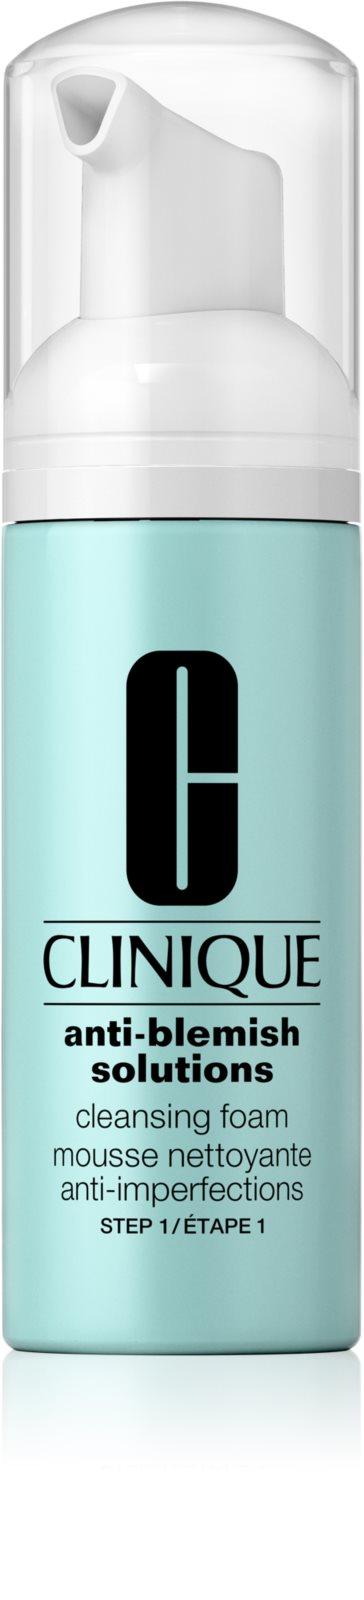 Clinique Anti-Blemish Solutions Cleansing Foam Cleansing Foam for Problematic Skin, Acne - Perfume Oasis